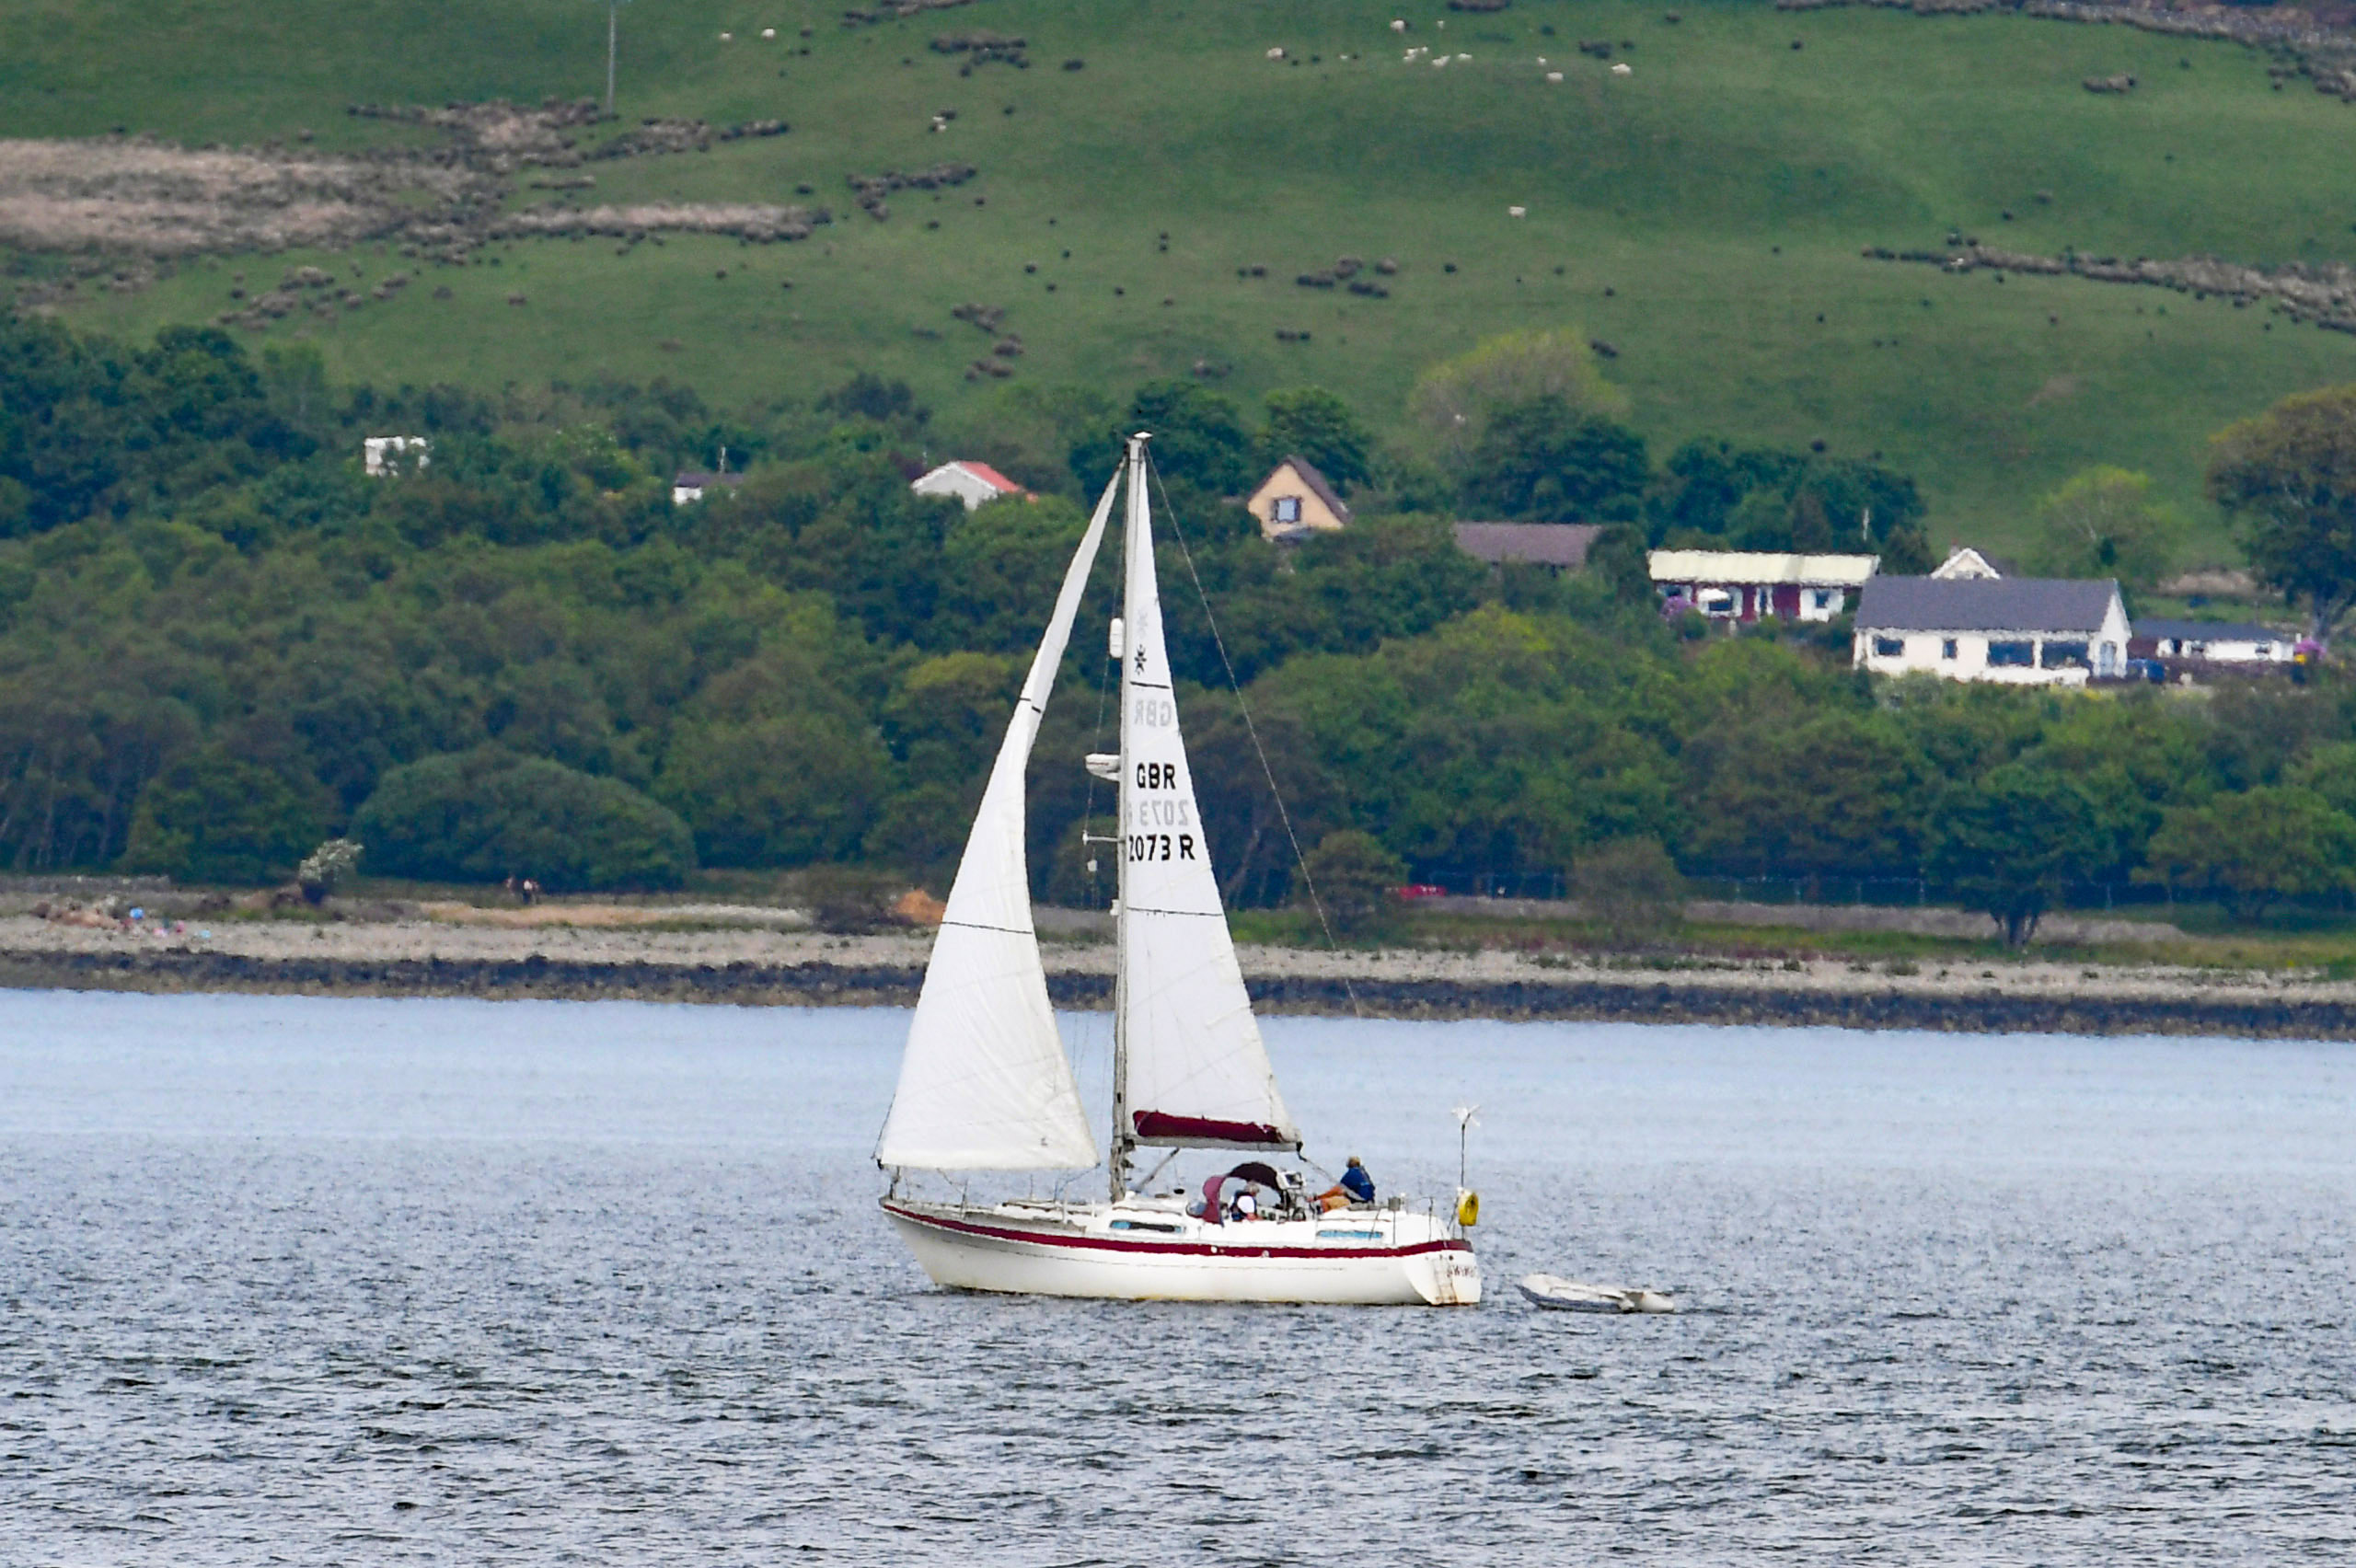 Sailing on: A yacht passed through Gourock Bay.